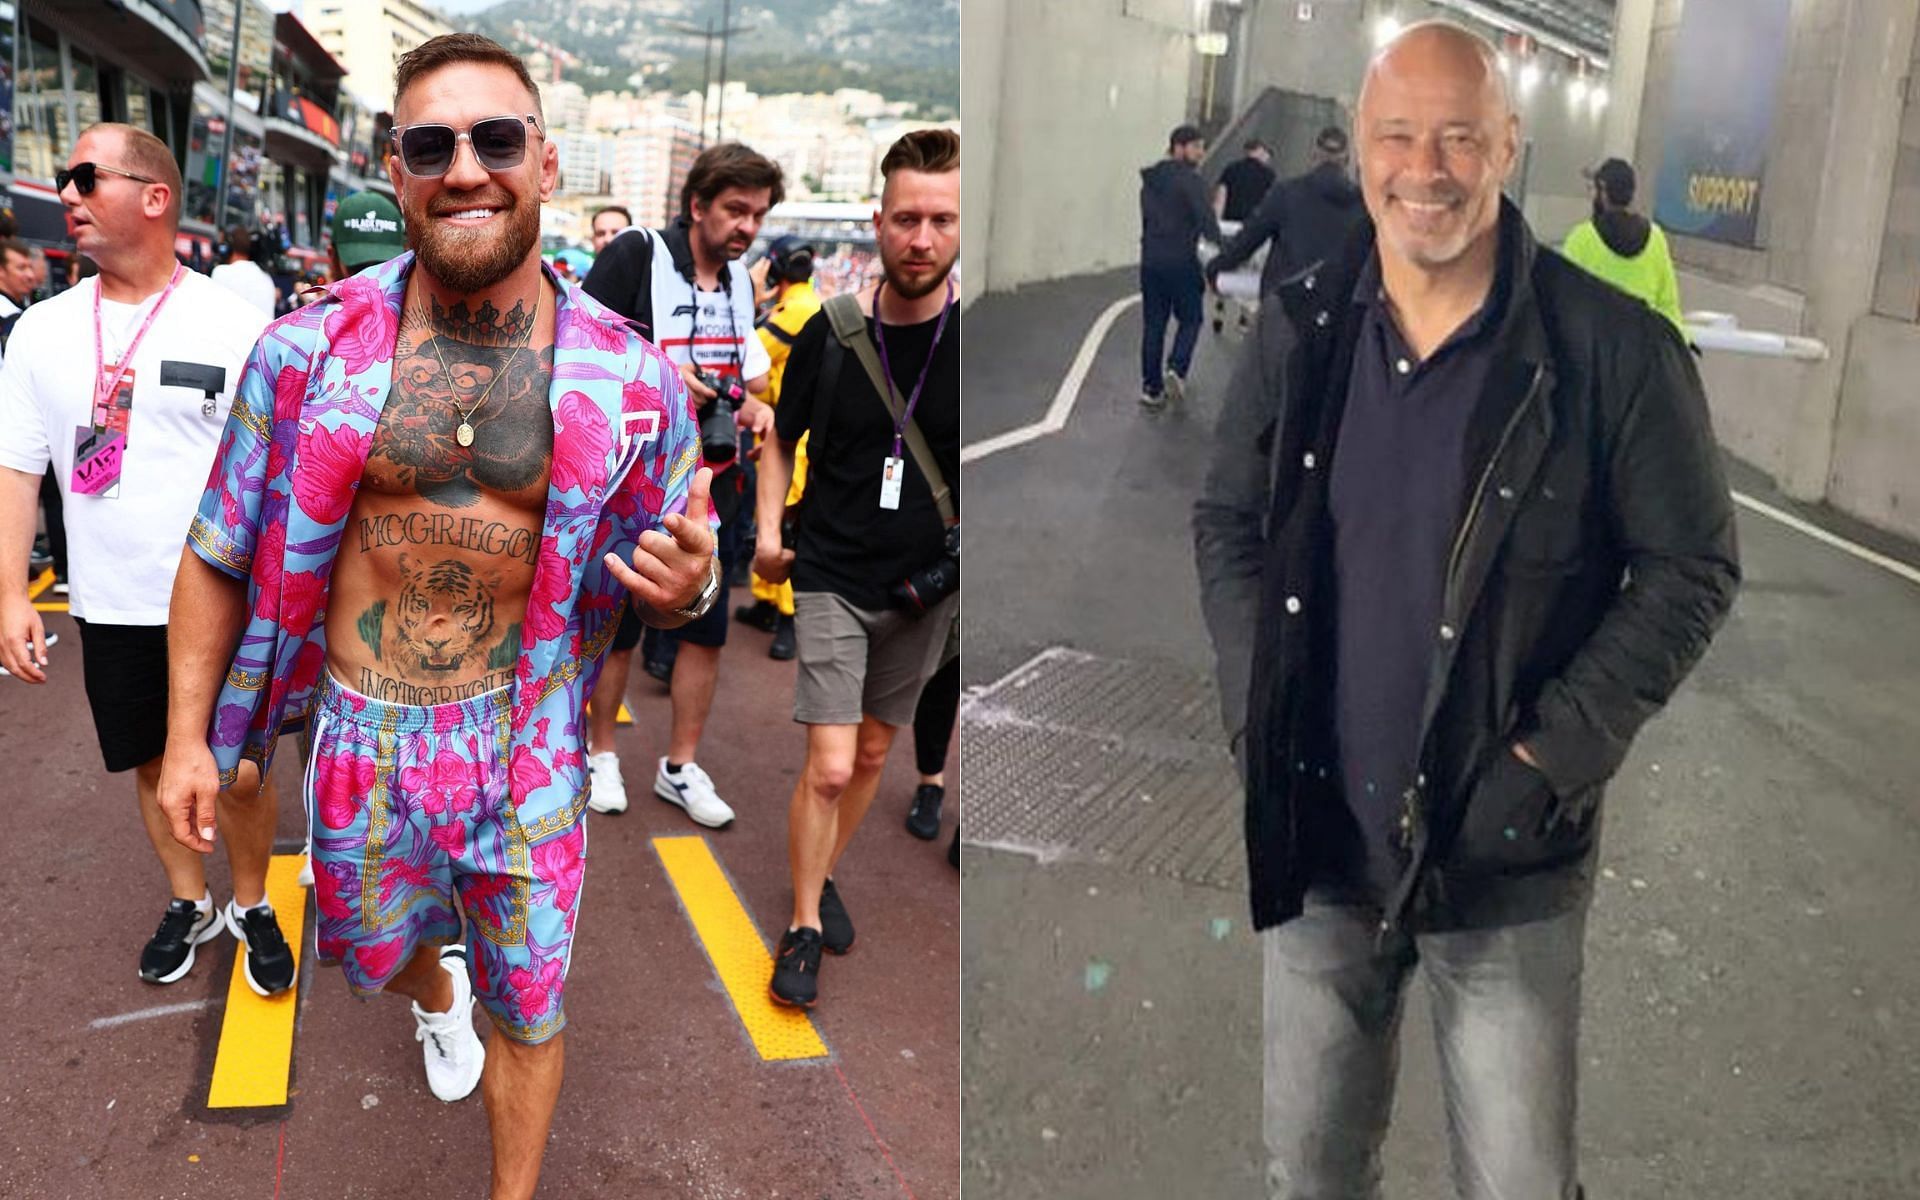 Conor McGregor (left) and Paul McGrath (right) [Image credits: @paulnumber5 on Instagram]